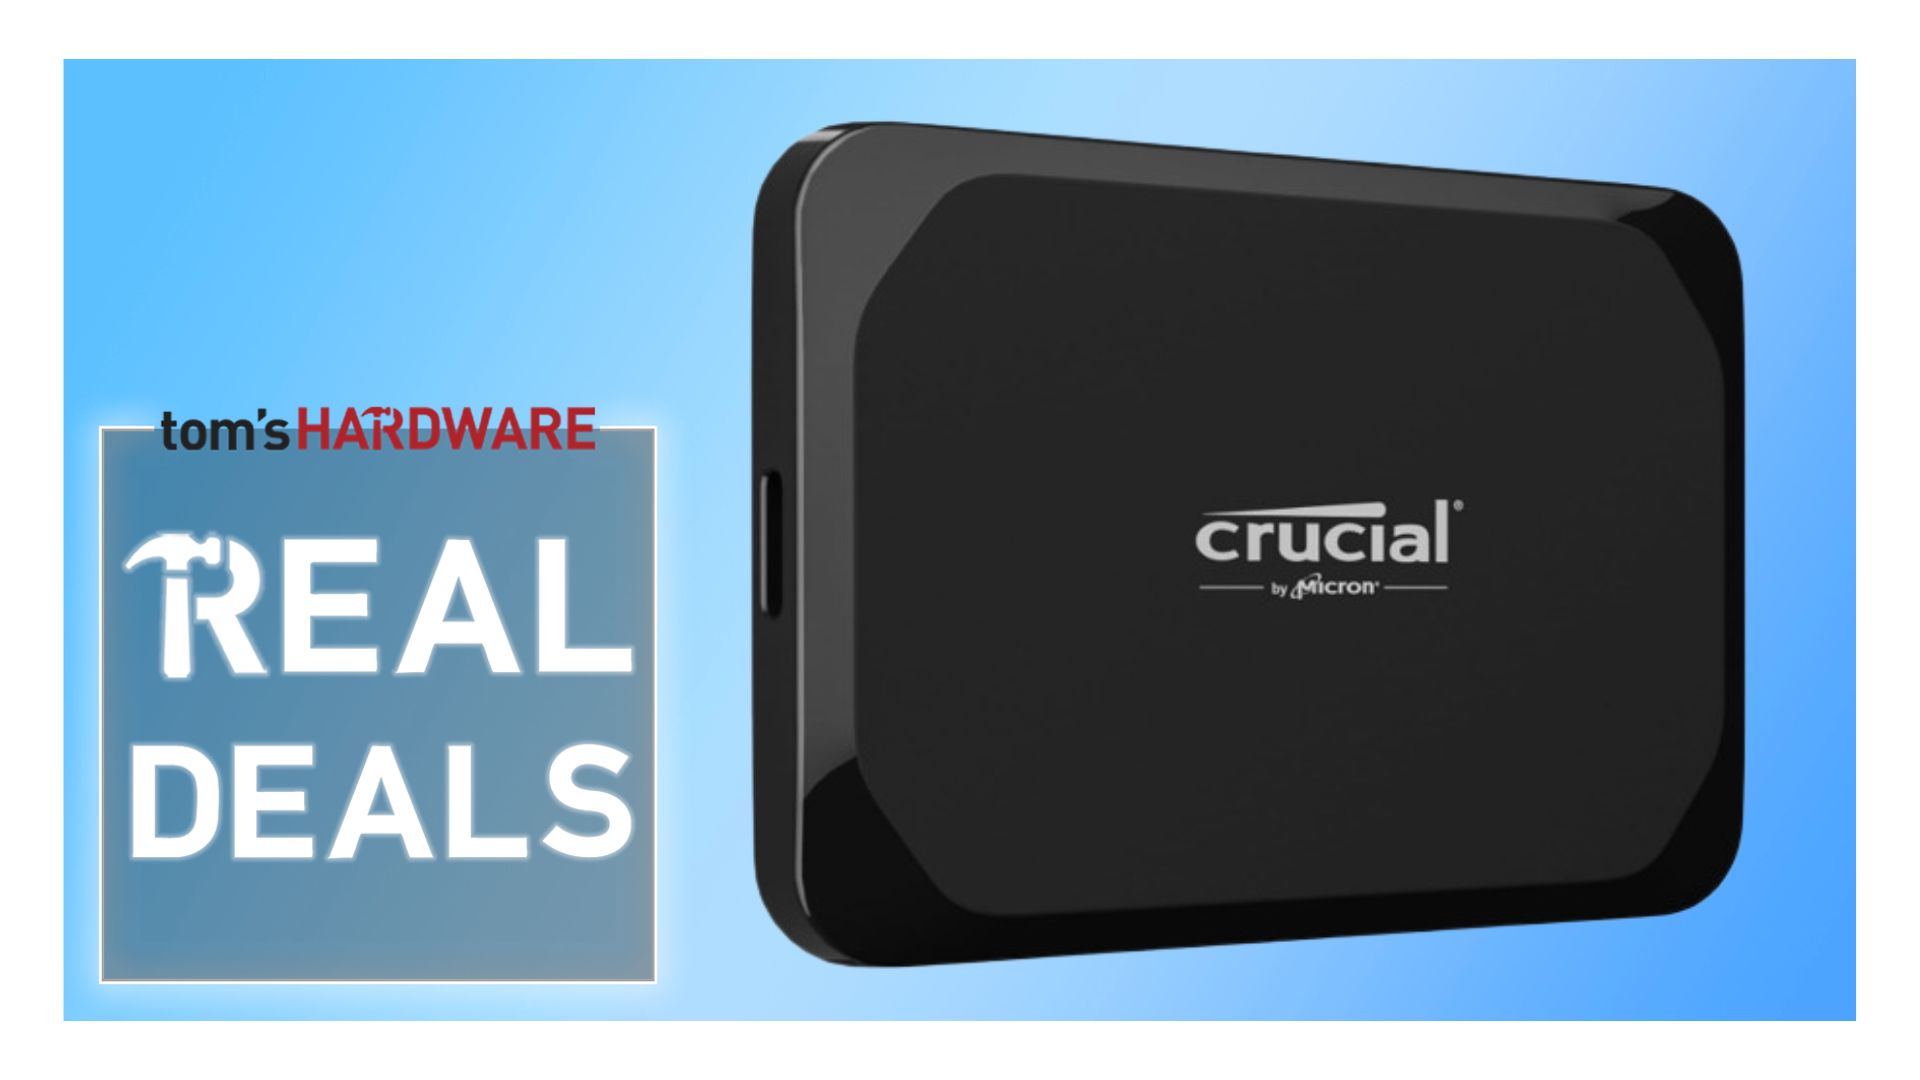 Crucial's 2TB X9 portable SSD drops to a new low of $99